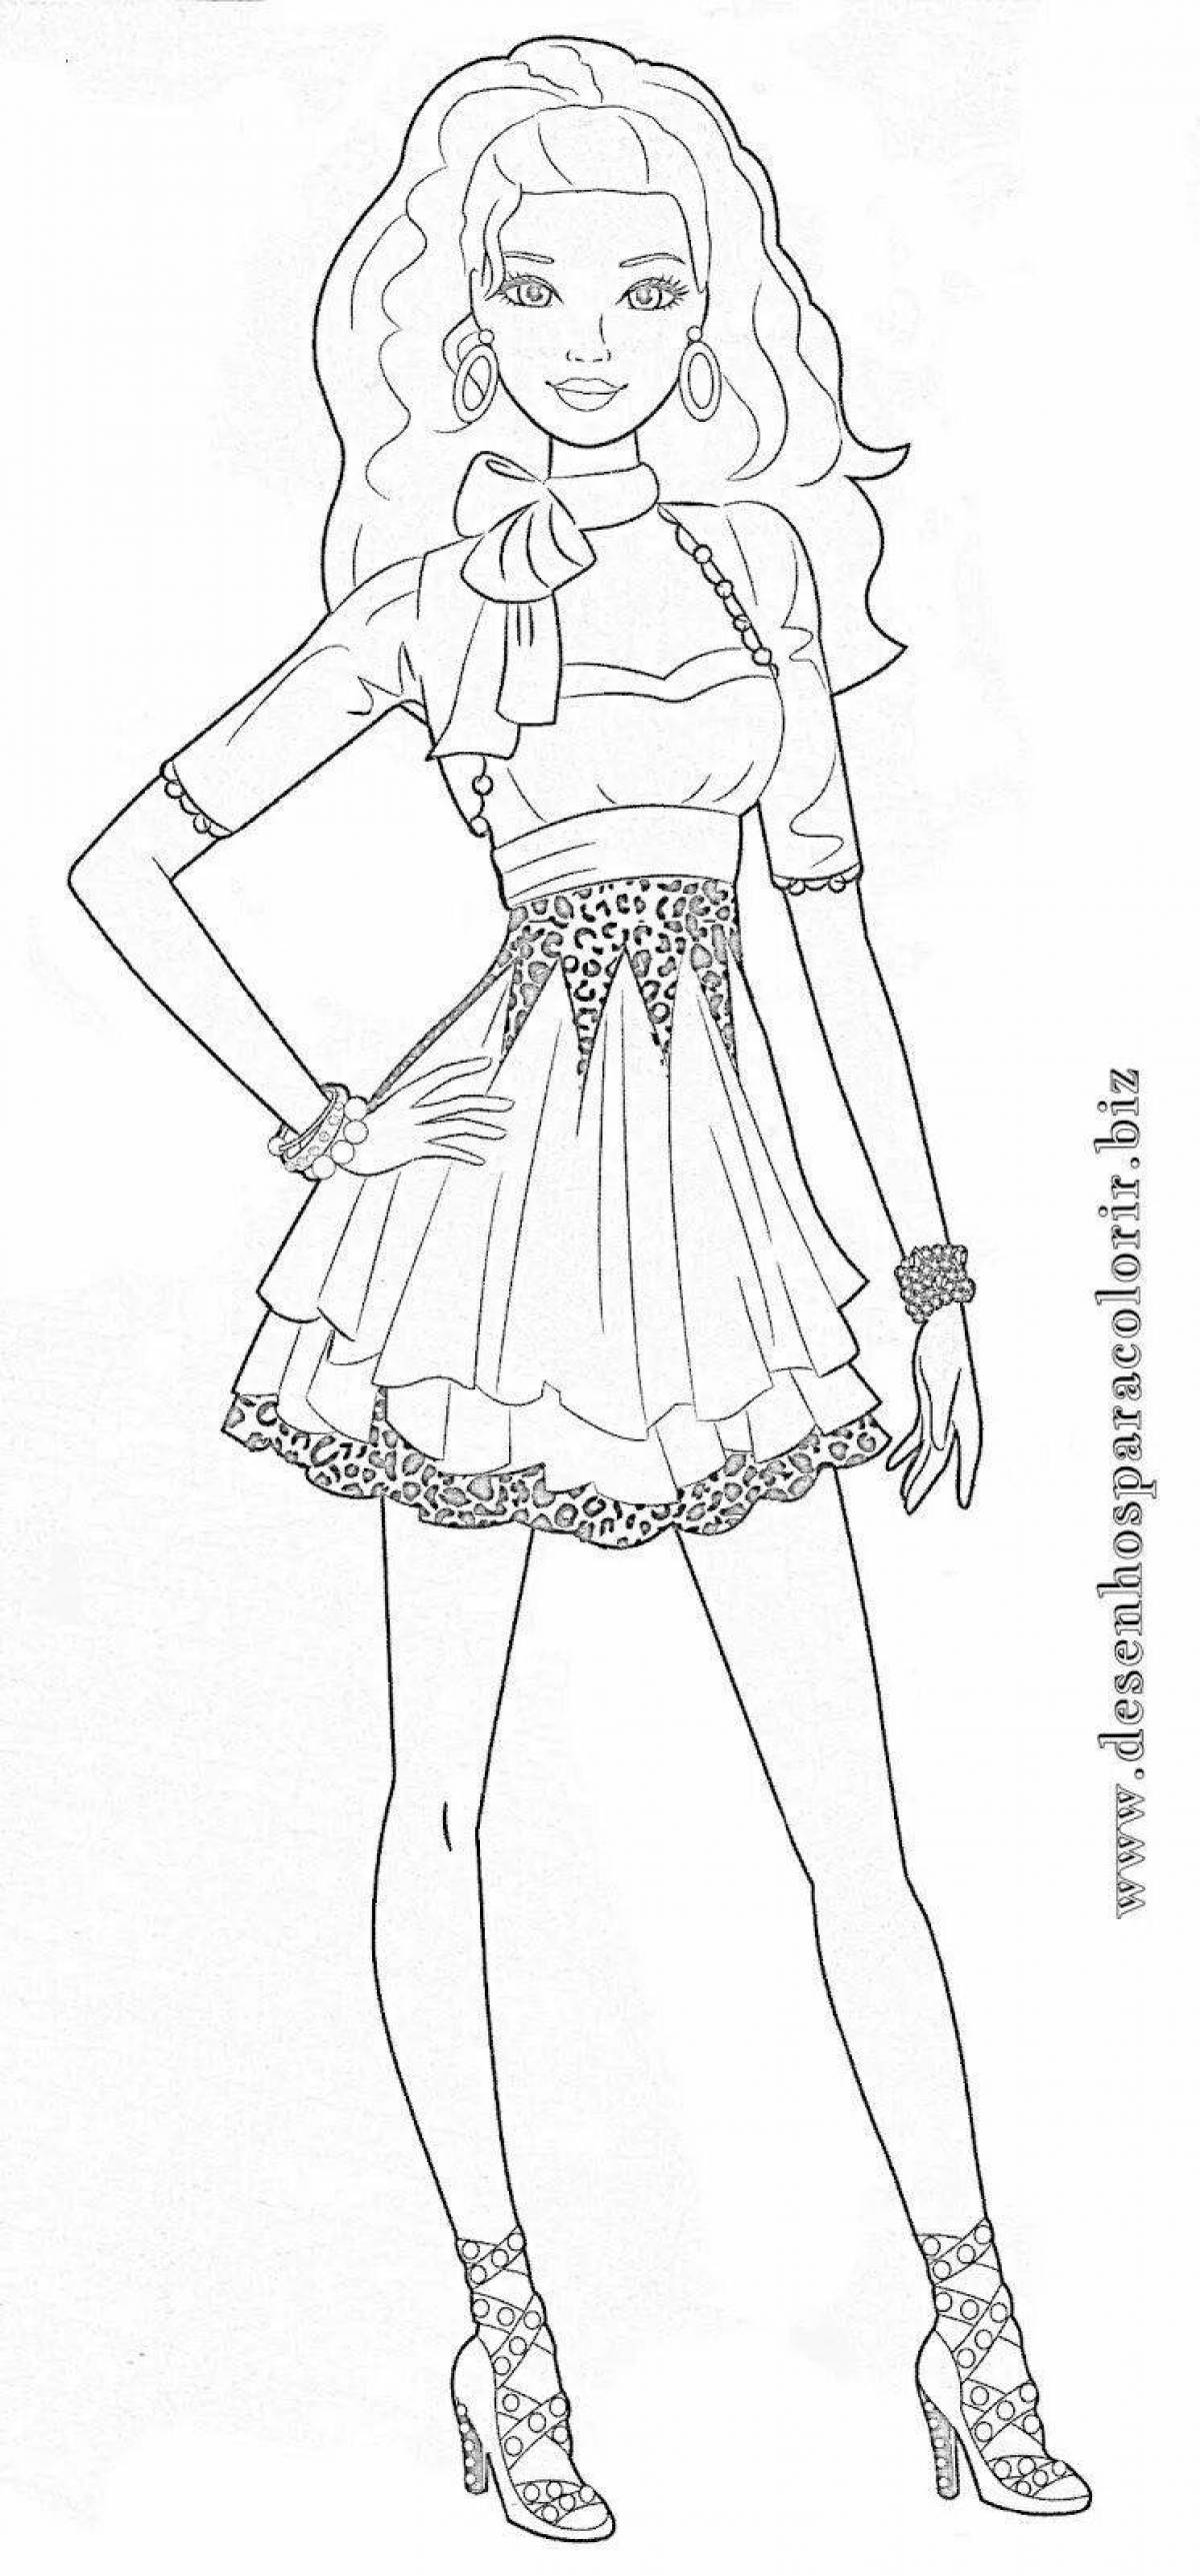 Full body dazzling coloring book